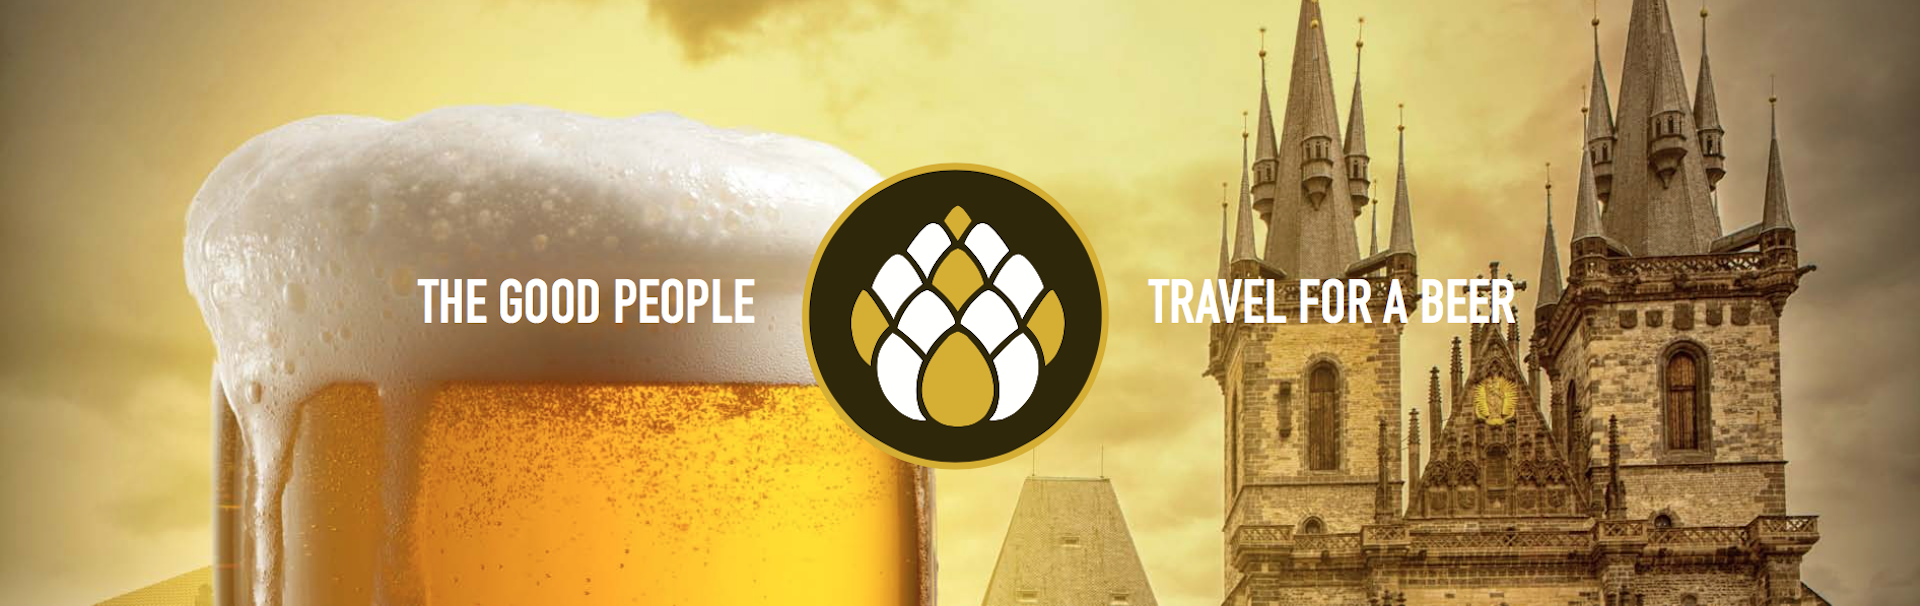 Good people travel for good beer